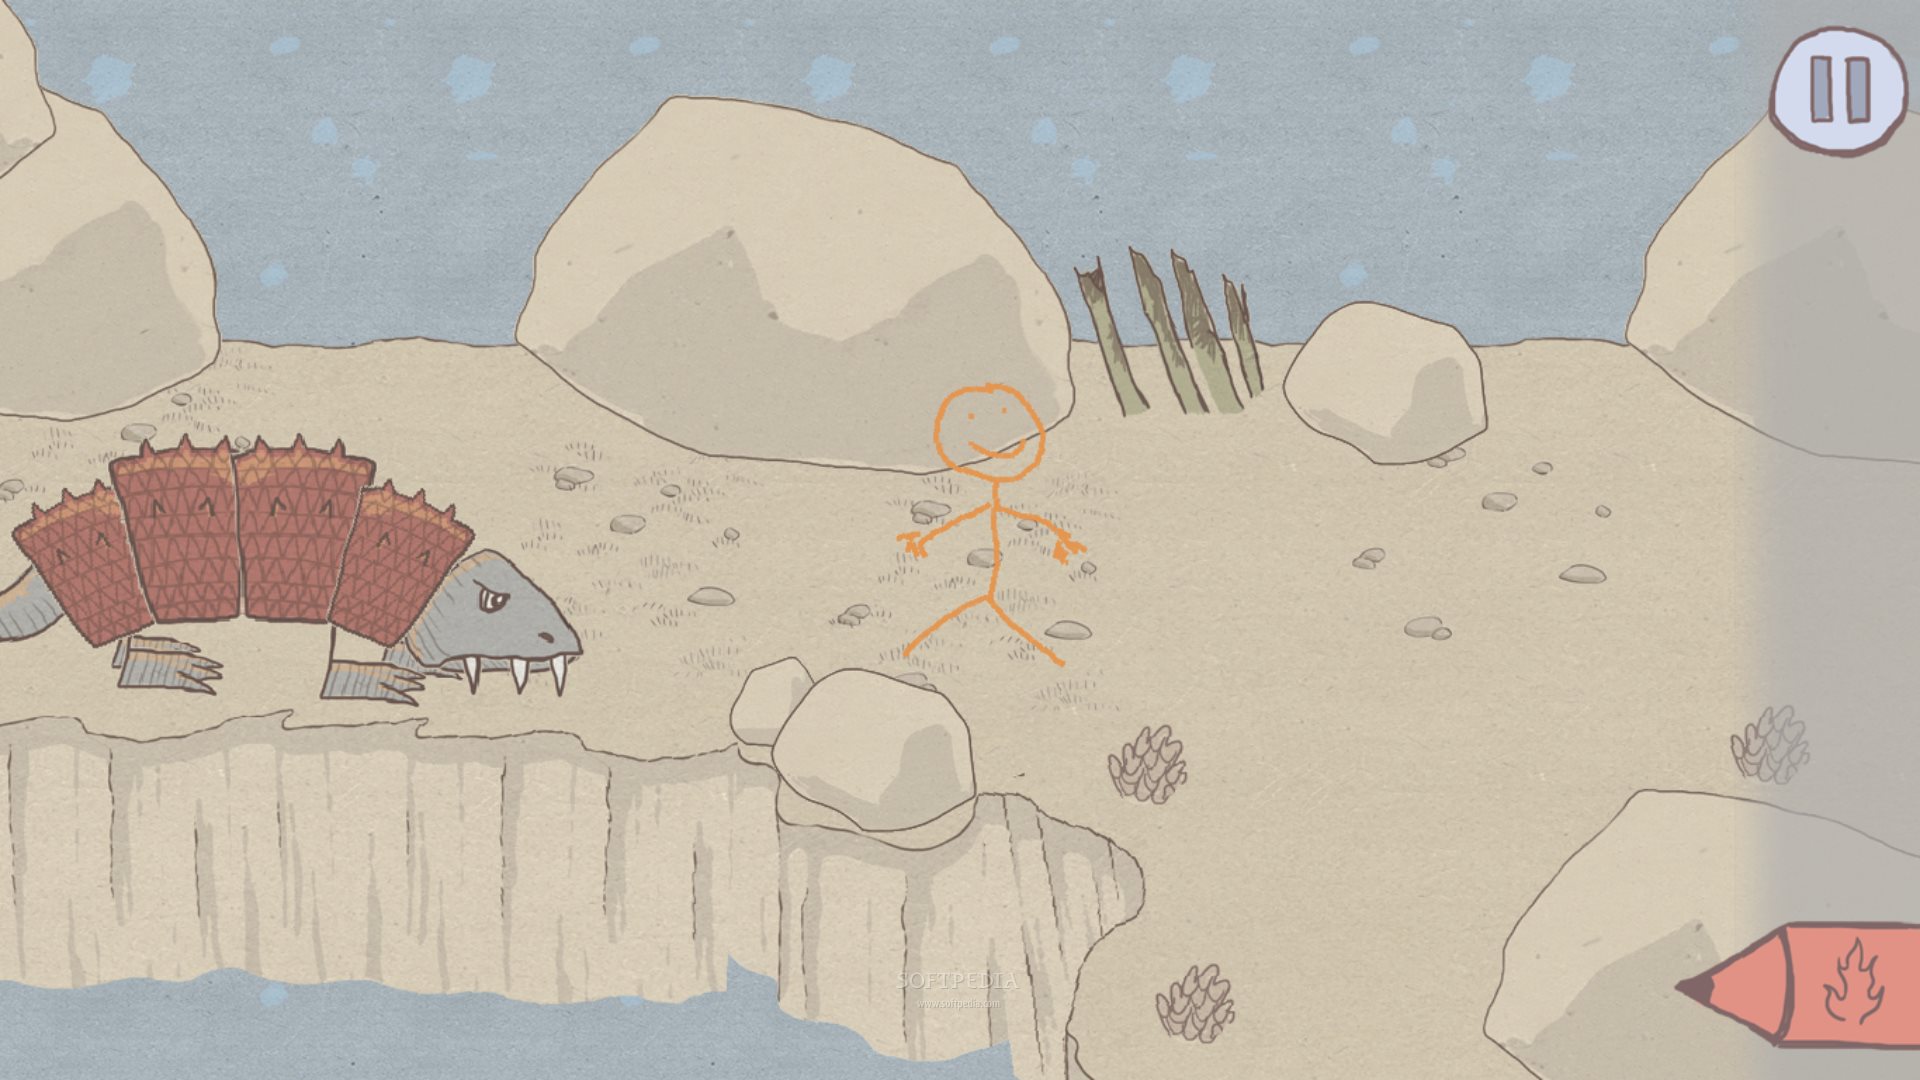 Draw a Stickman: EPIC Free instal the last version for iphone